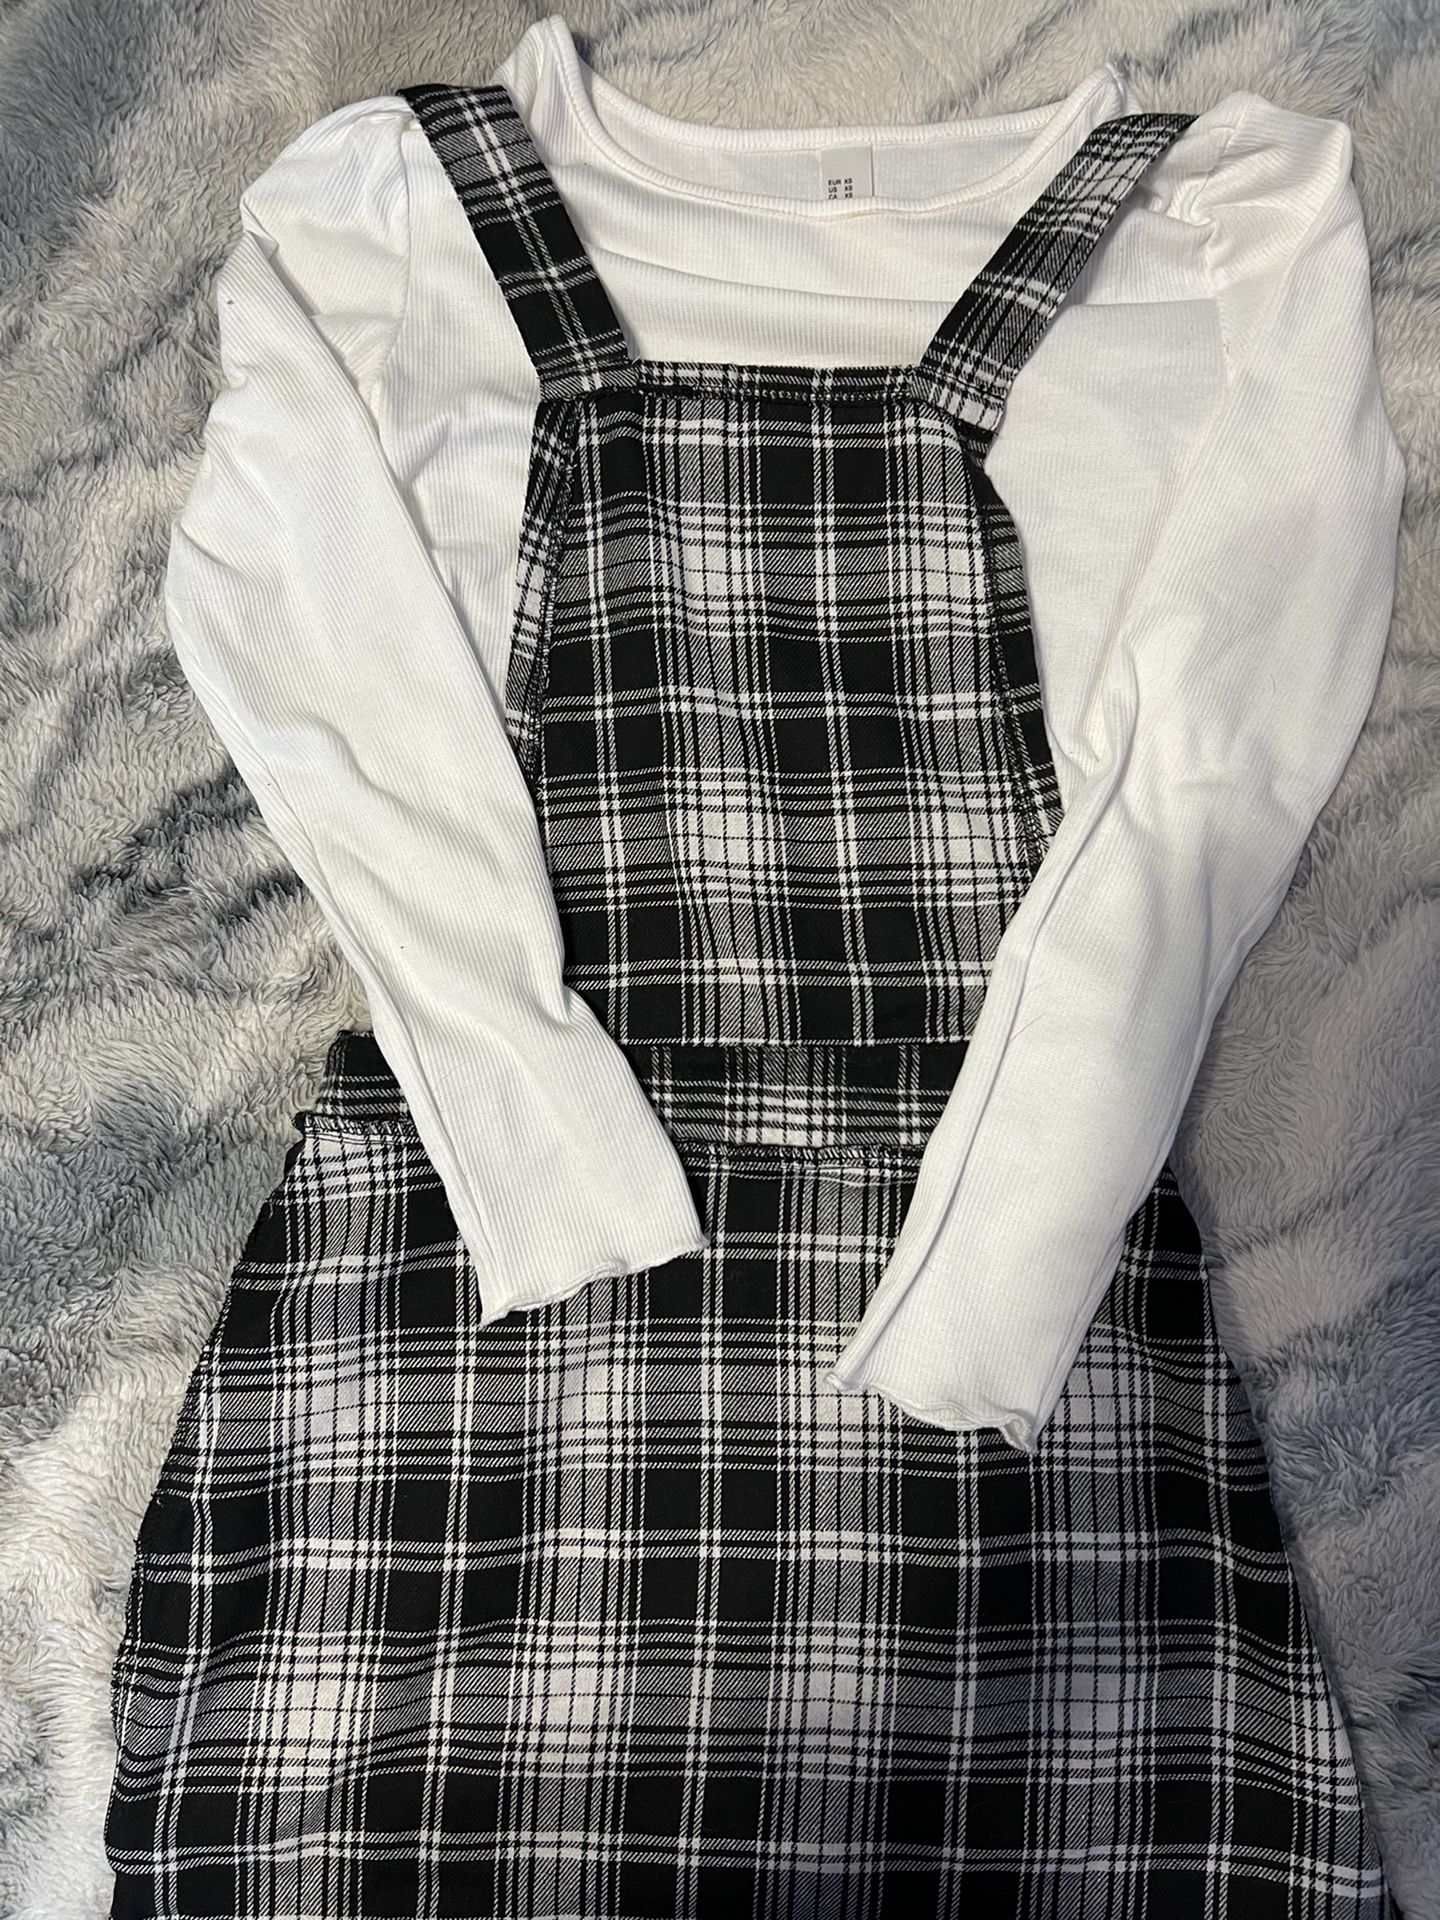 Plaid  Jumper with  White Long Sleeve Shirt Size X Small